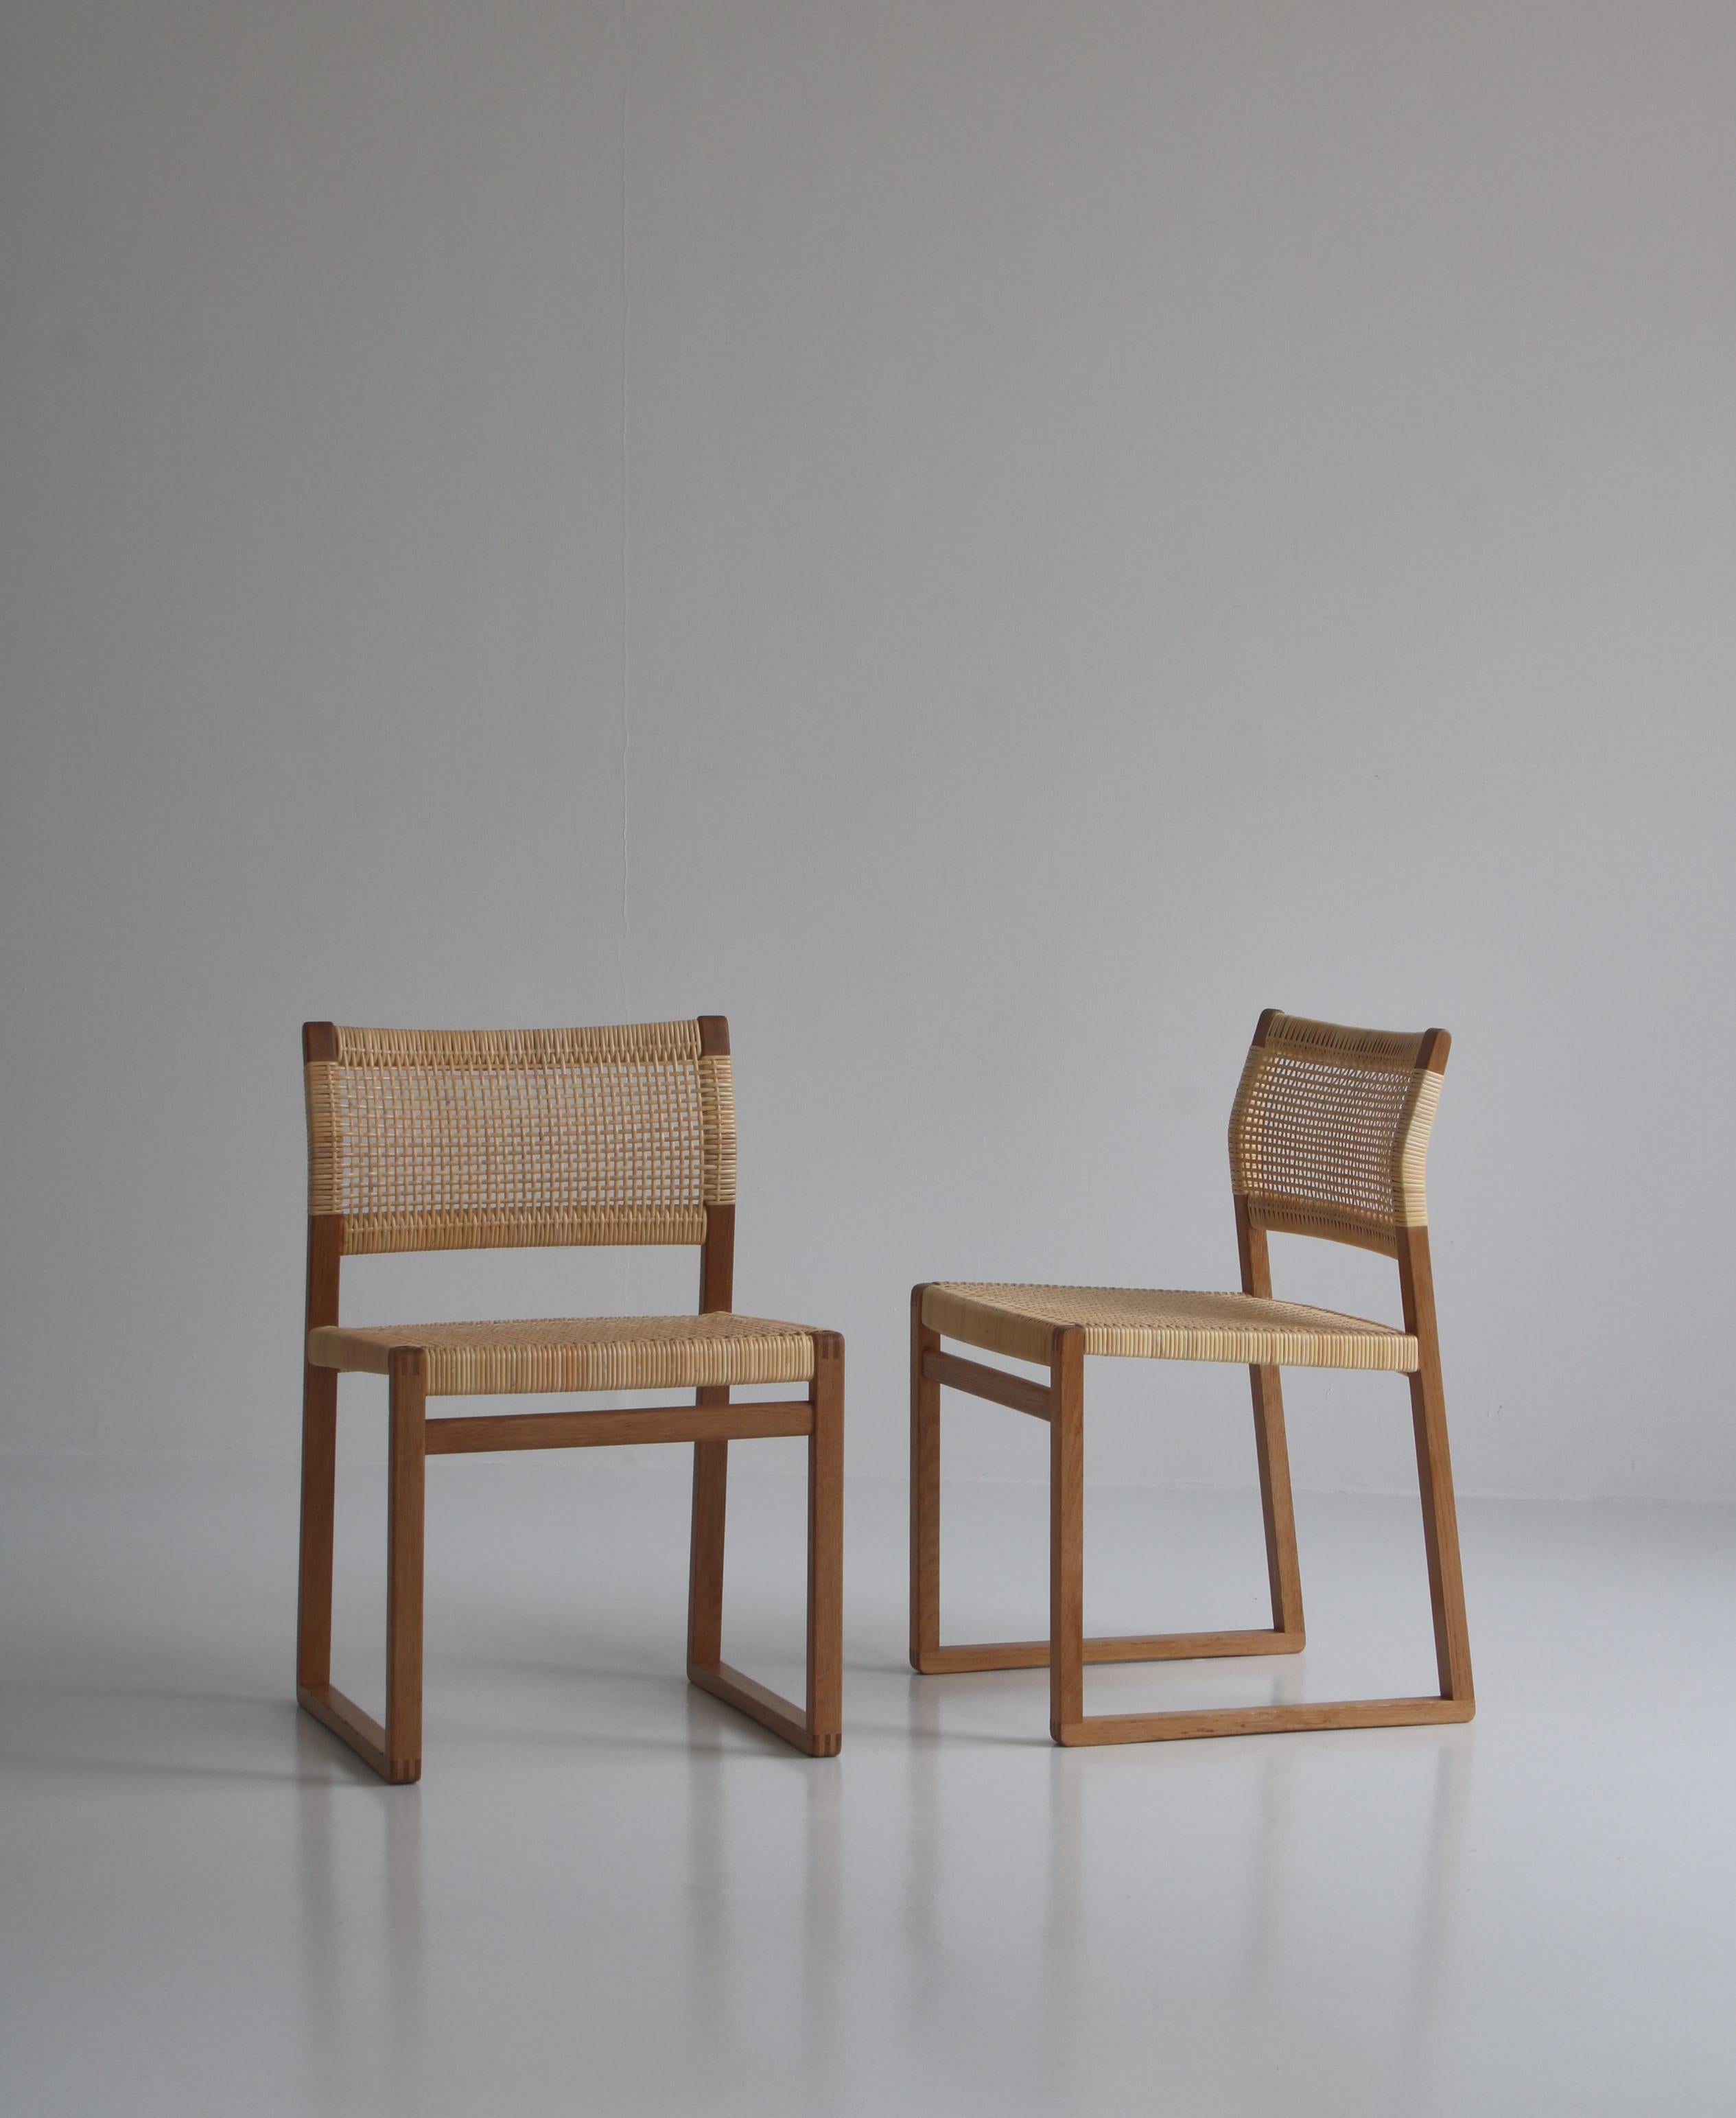 Vintage Danish Modern chairs in oak and rattan cane designed by Danish designer Børge Mogensen in the 1950s and manufactured at 